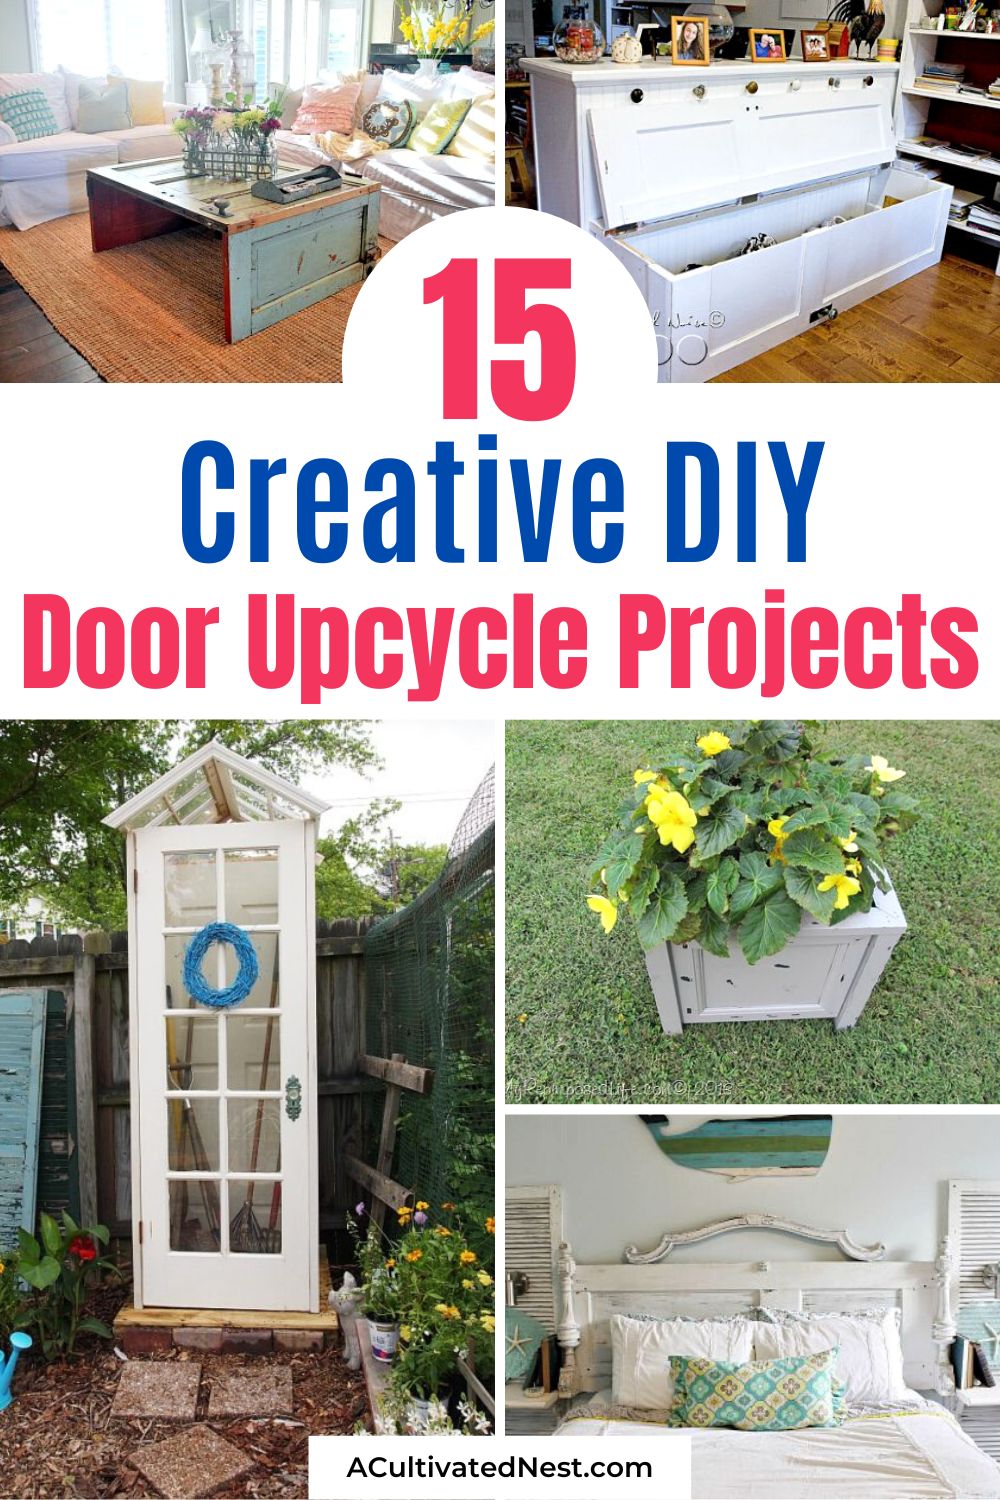 15 Creative Upcycled Door DIY Projects- Have some old doors from a home reno project? Don't throw them out! There are many beautiful upcycled door DIY projects you could make! | repurpose old doors, reuse old doors, #upcycling #diyProject #diy #repurpose #ACultivatedNest